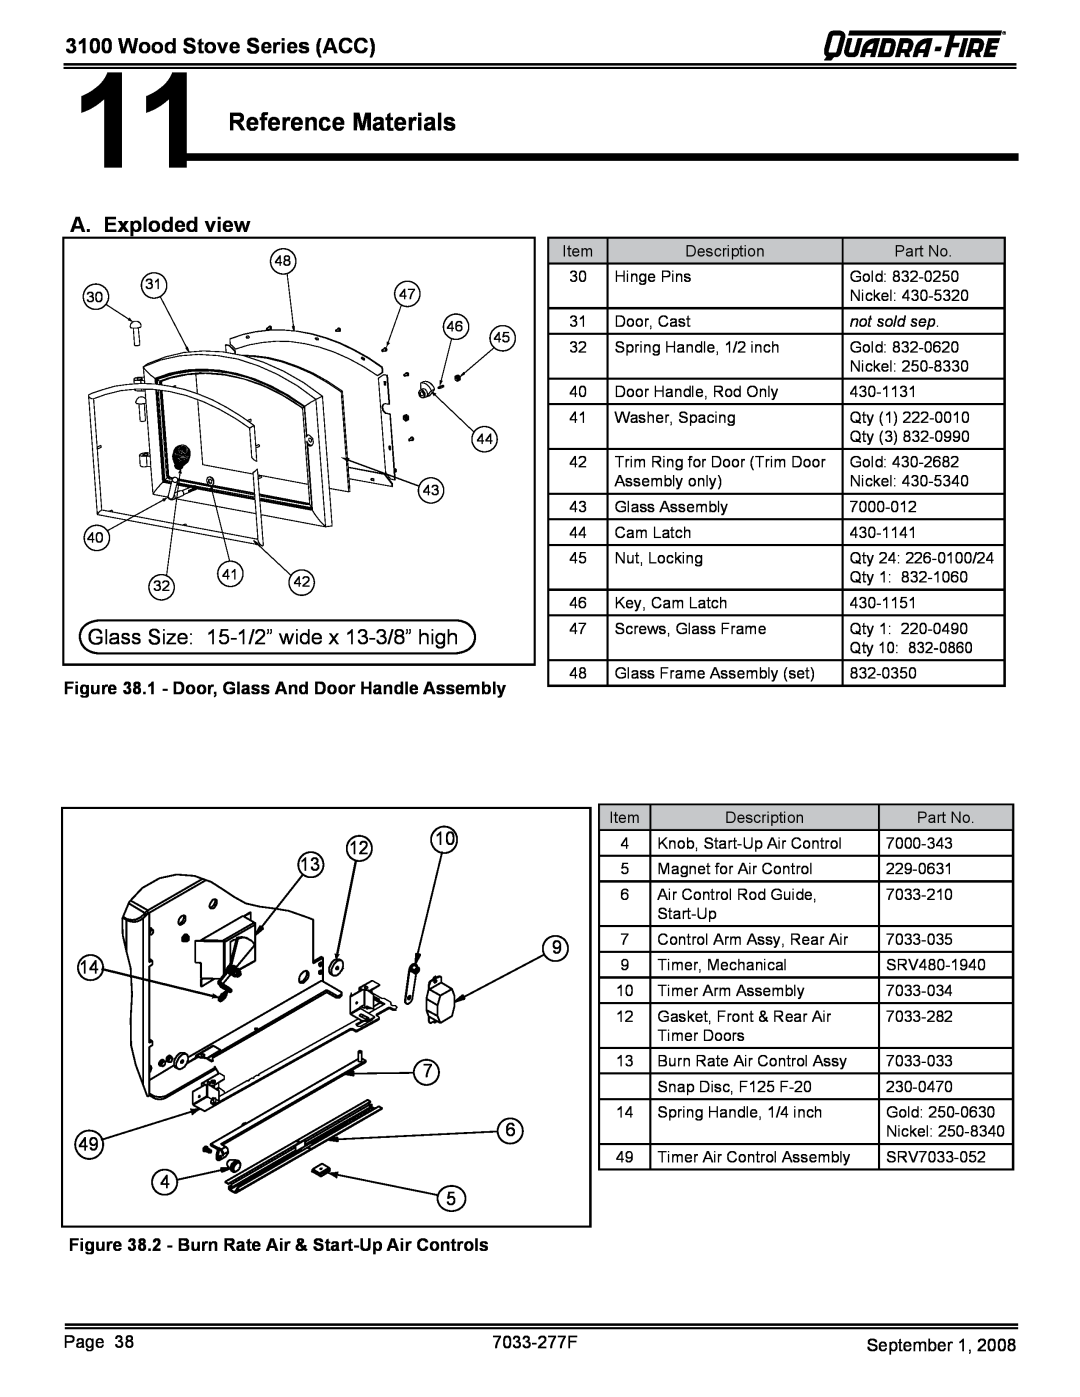 Hearth and Home Technologies 31ST-ACC owner manual Reference Materials, Wood Stove Series ACC, A. Exploded view, Glass Size 